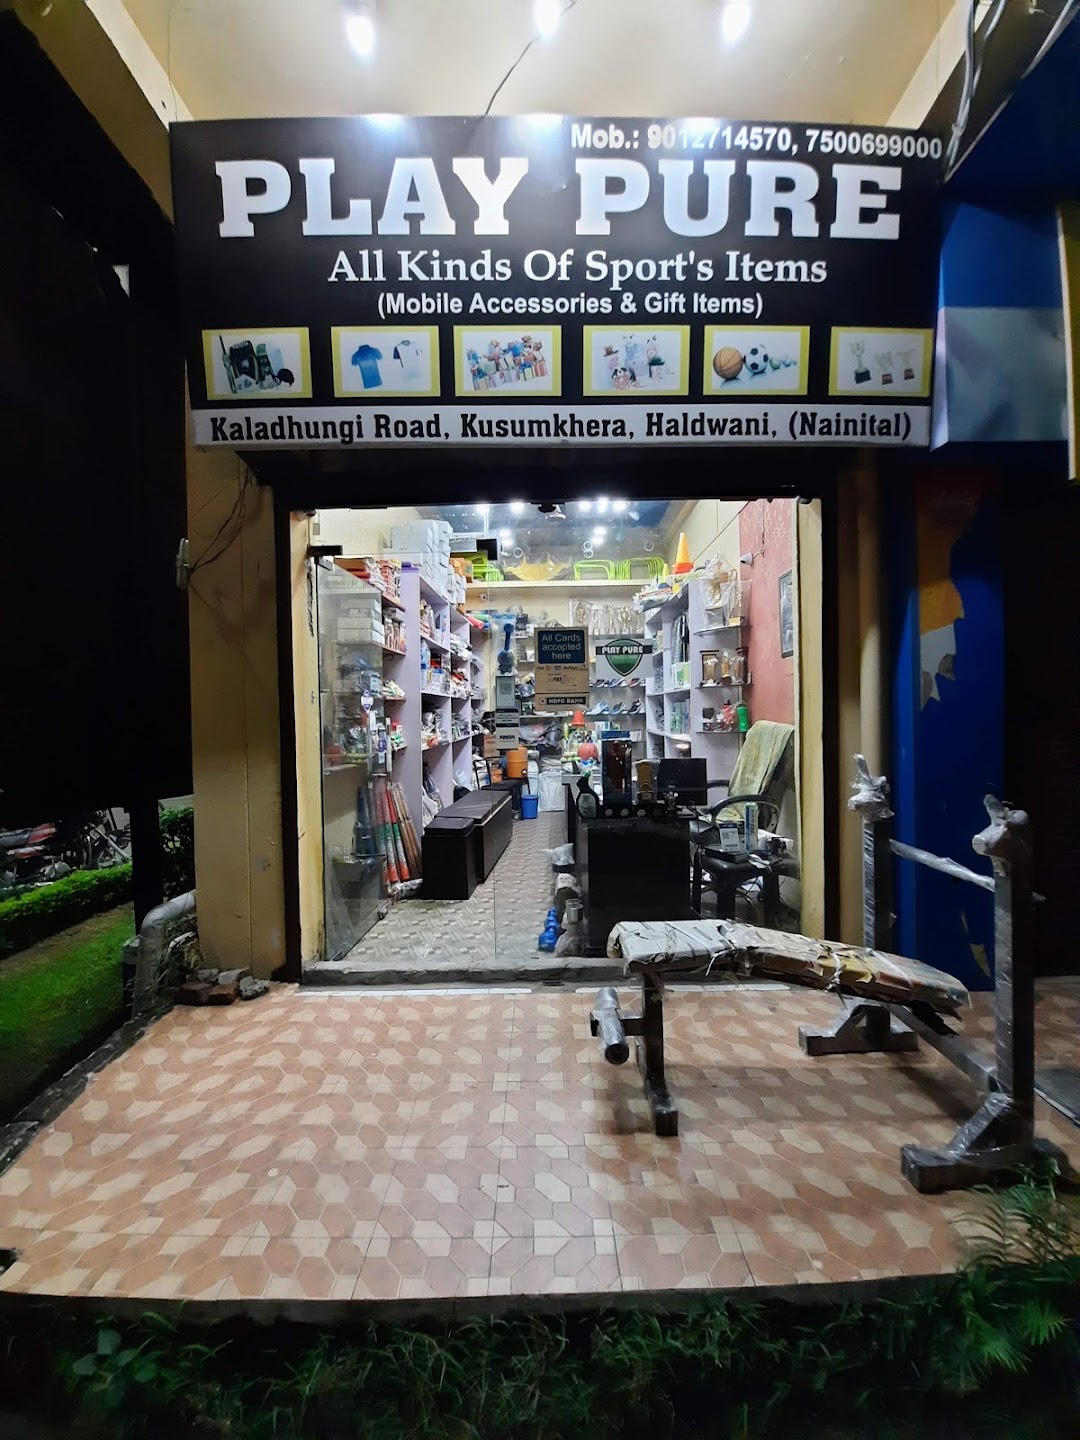 PLAY PURE